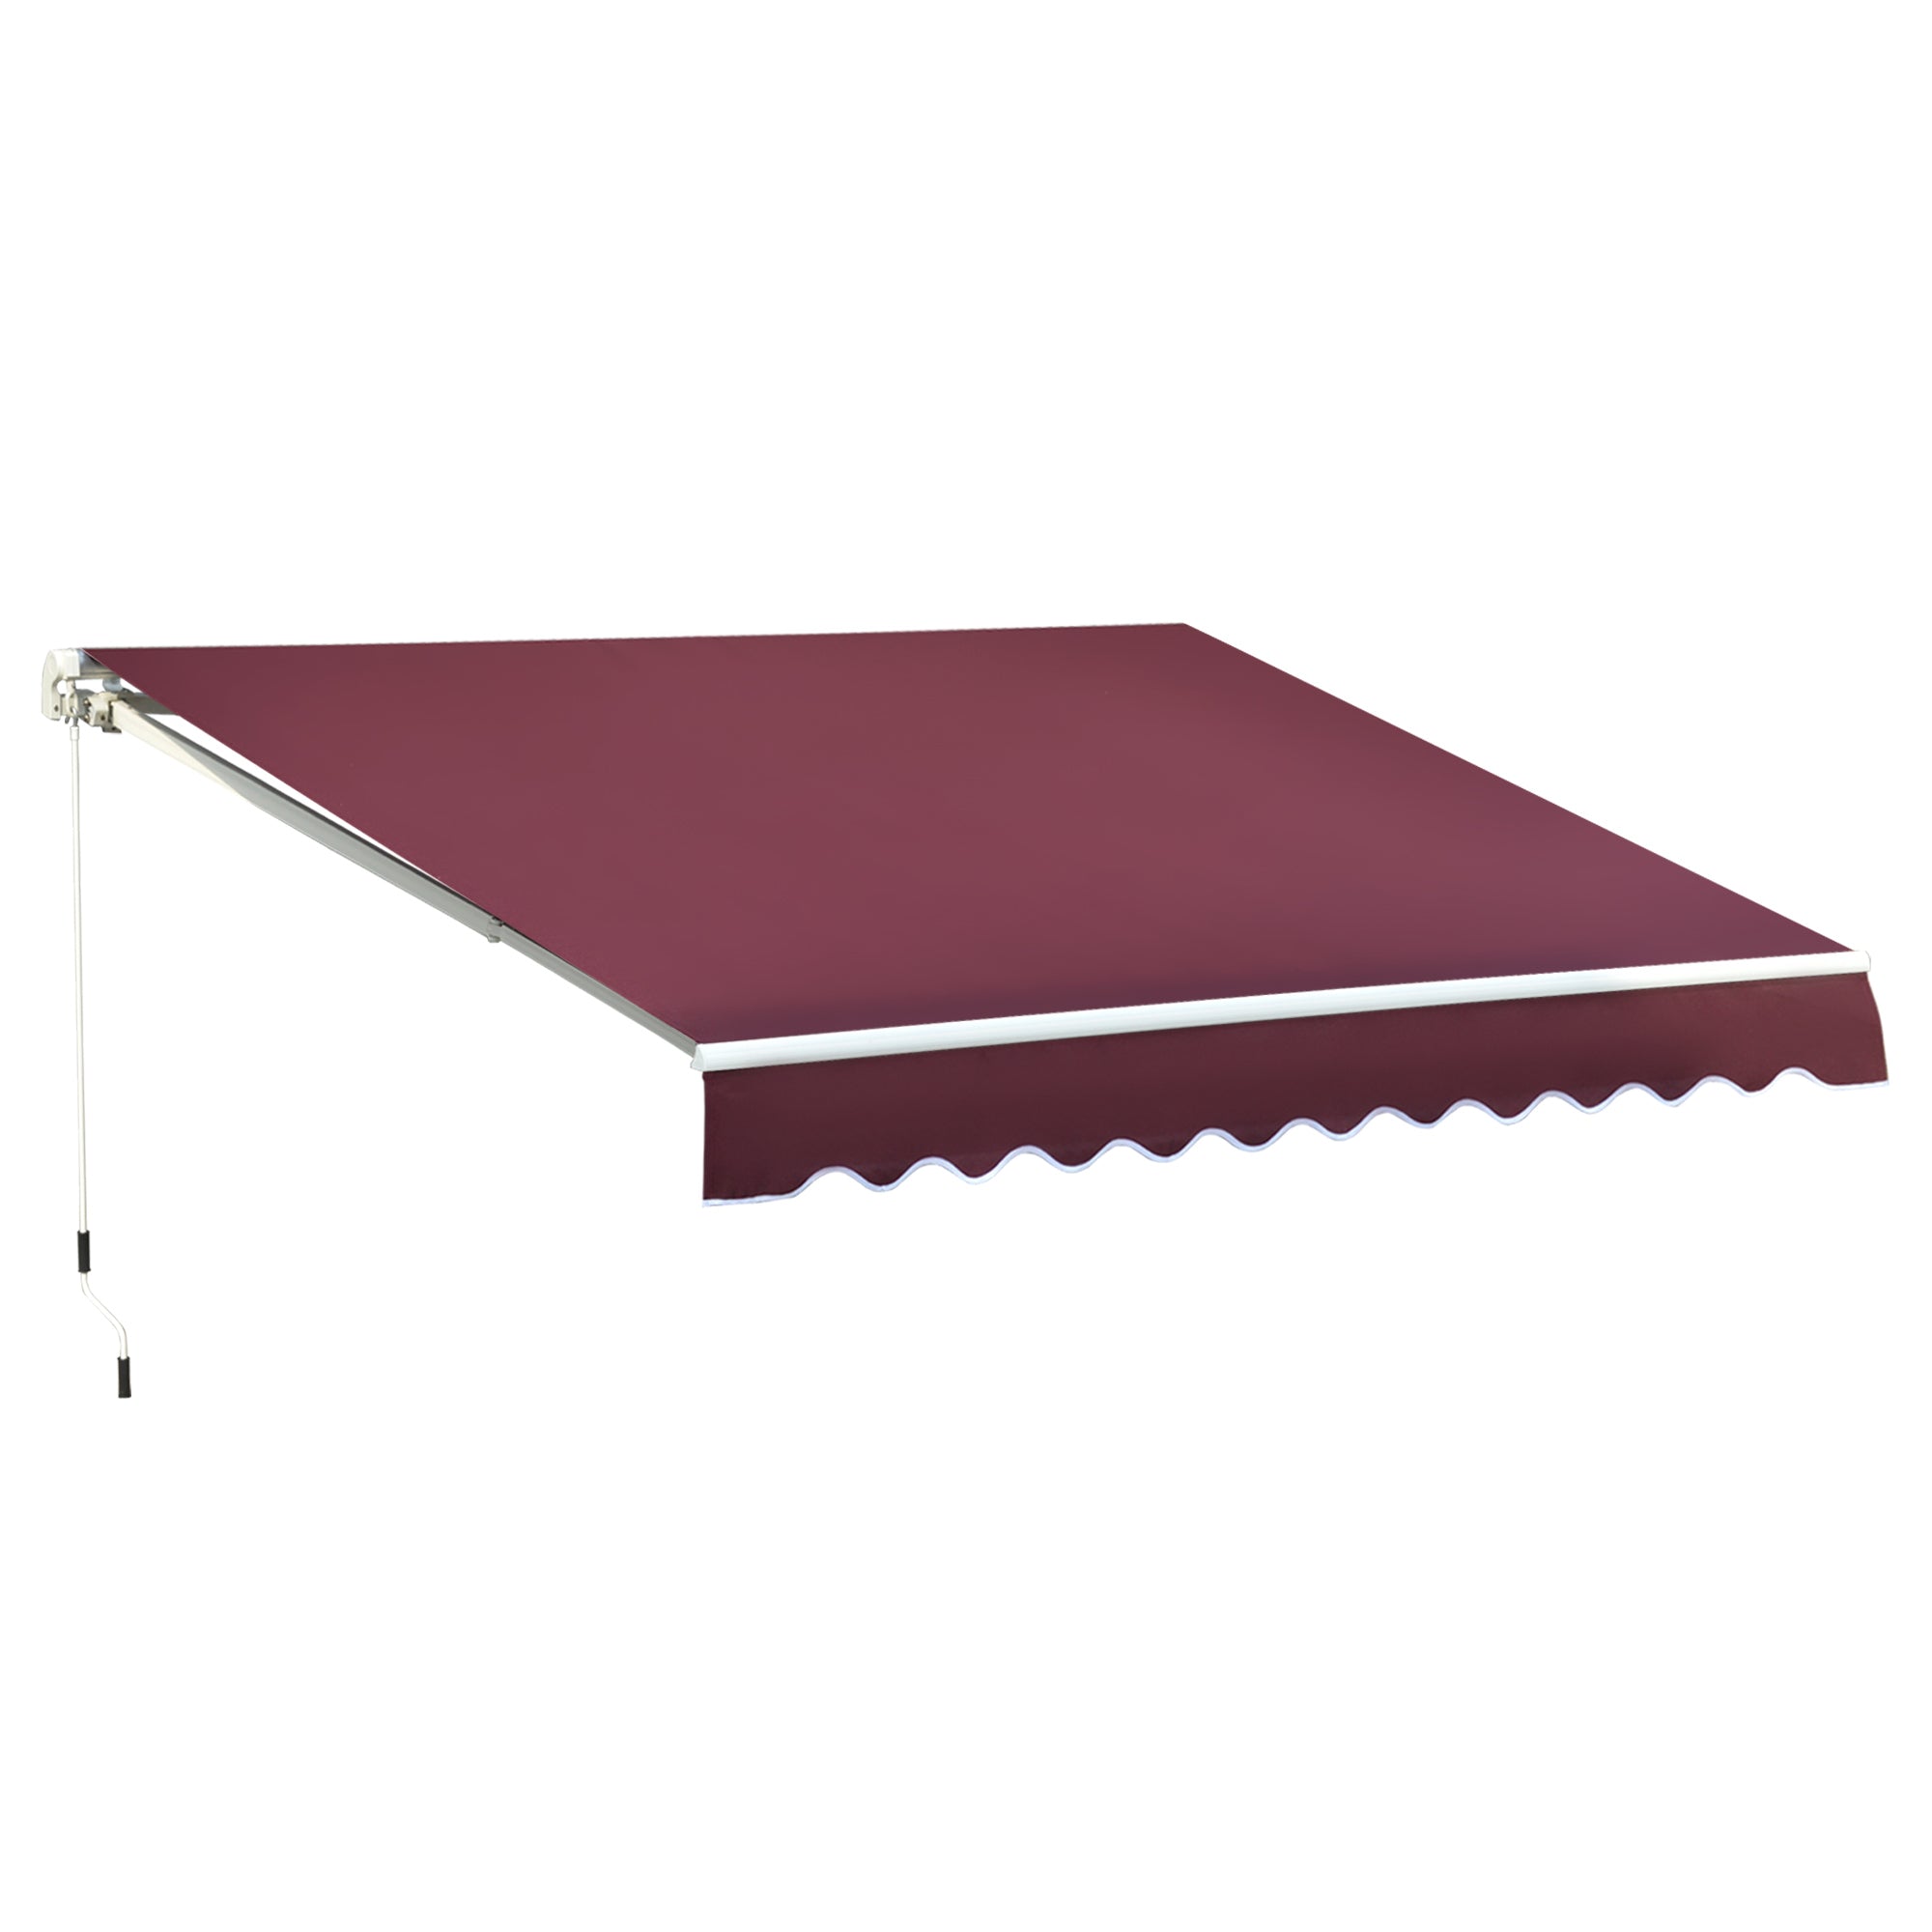 Outsunny Garden Sun Shade Canopy Retractable Awning - 4 x 3(m) - Red  | TJ Hughes